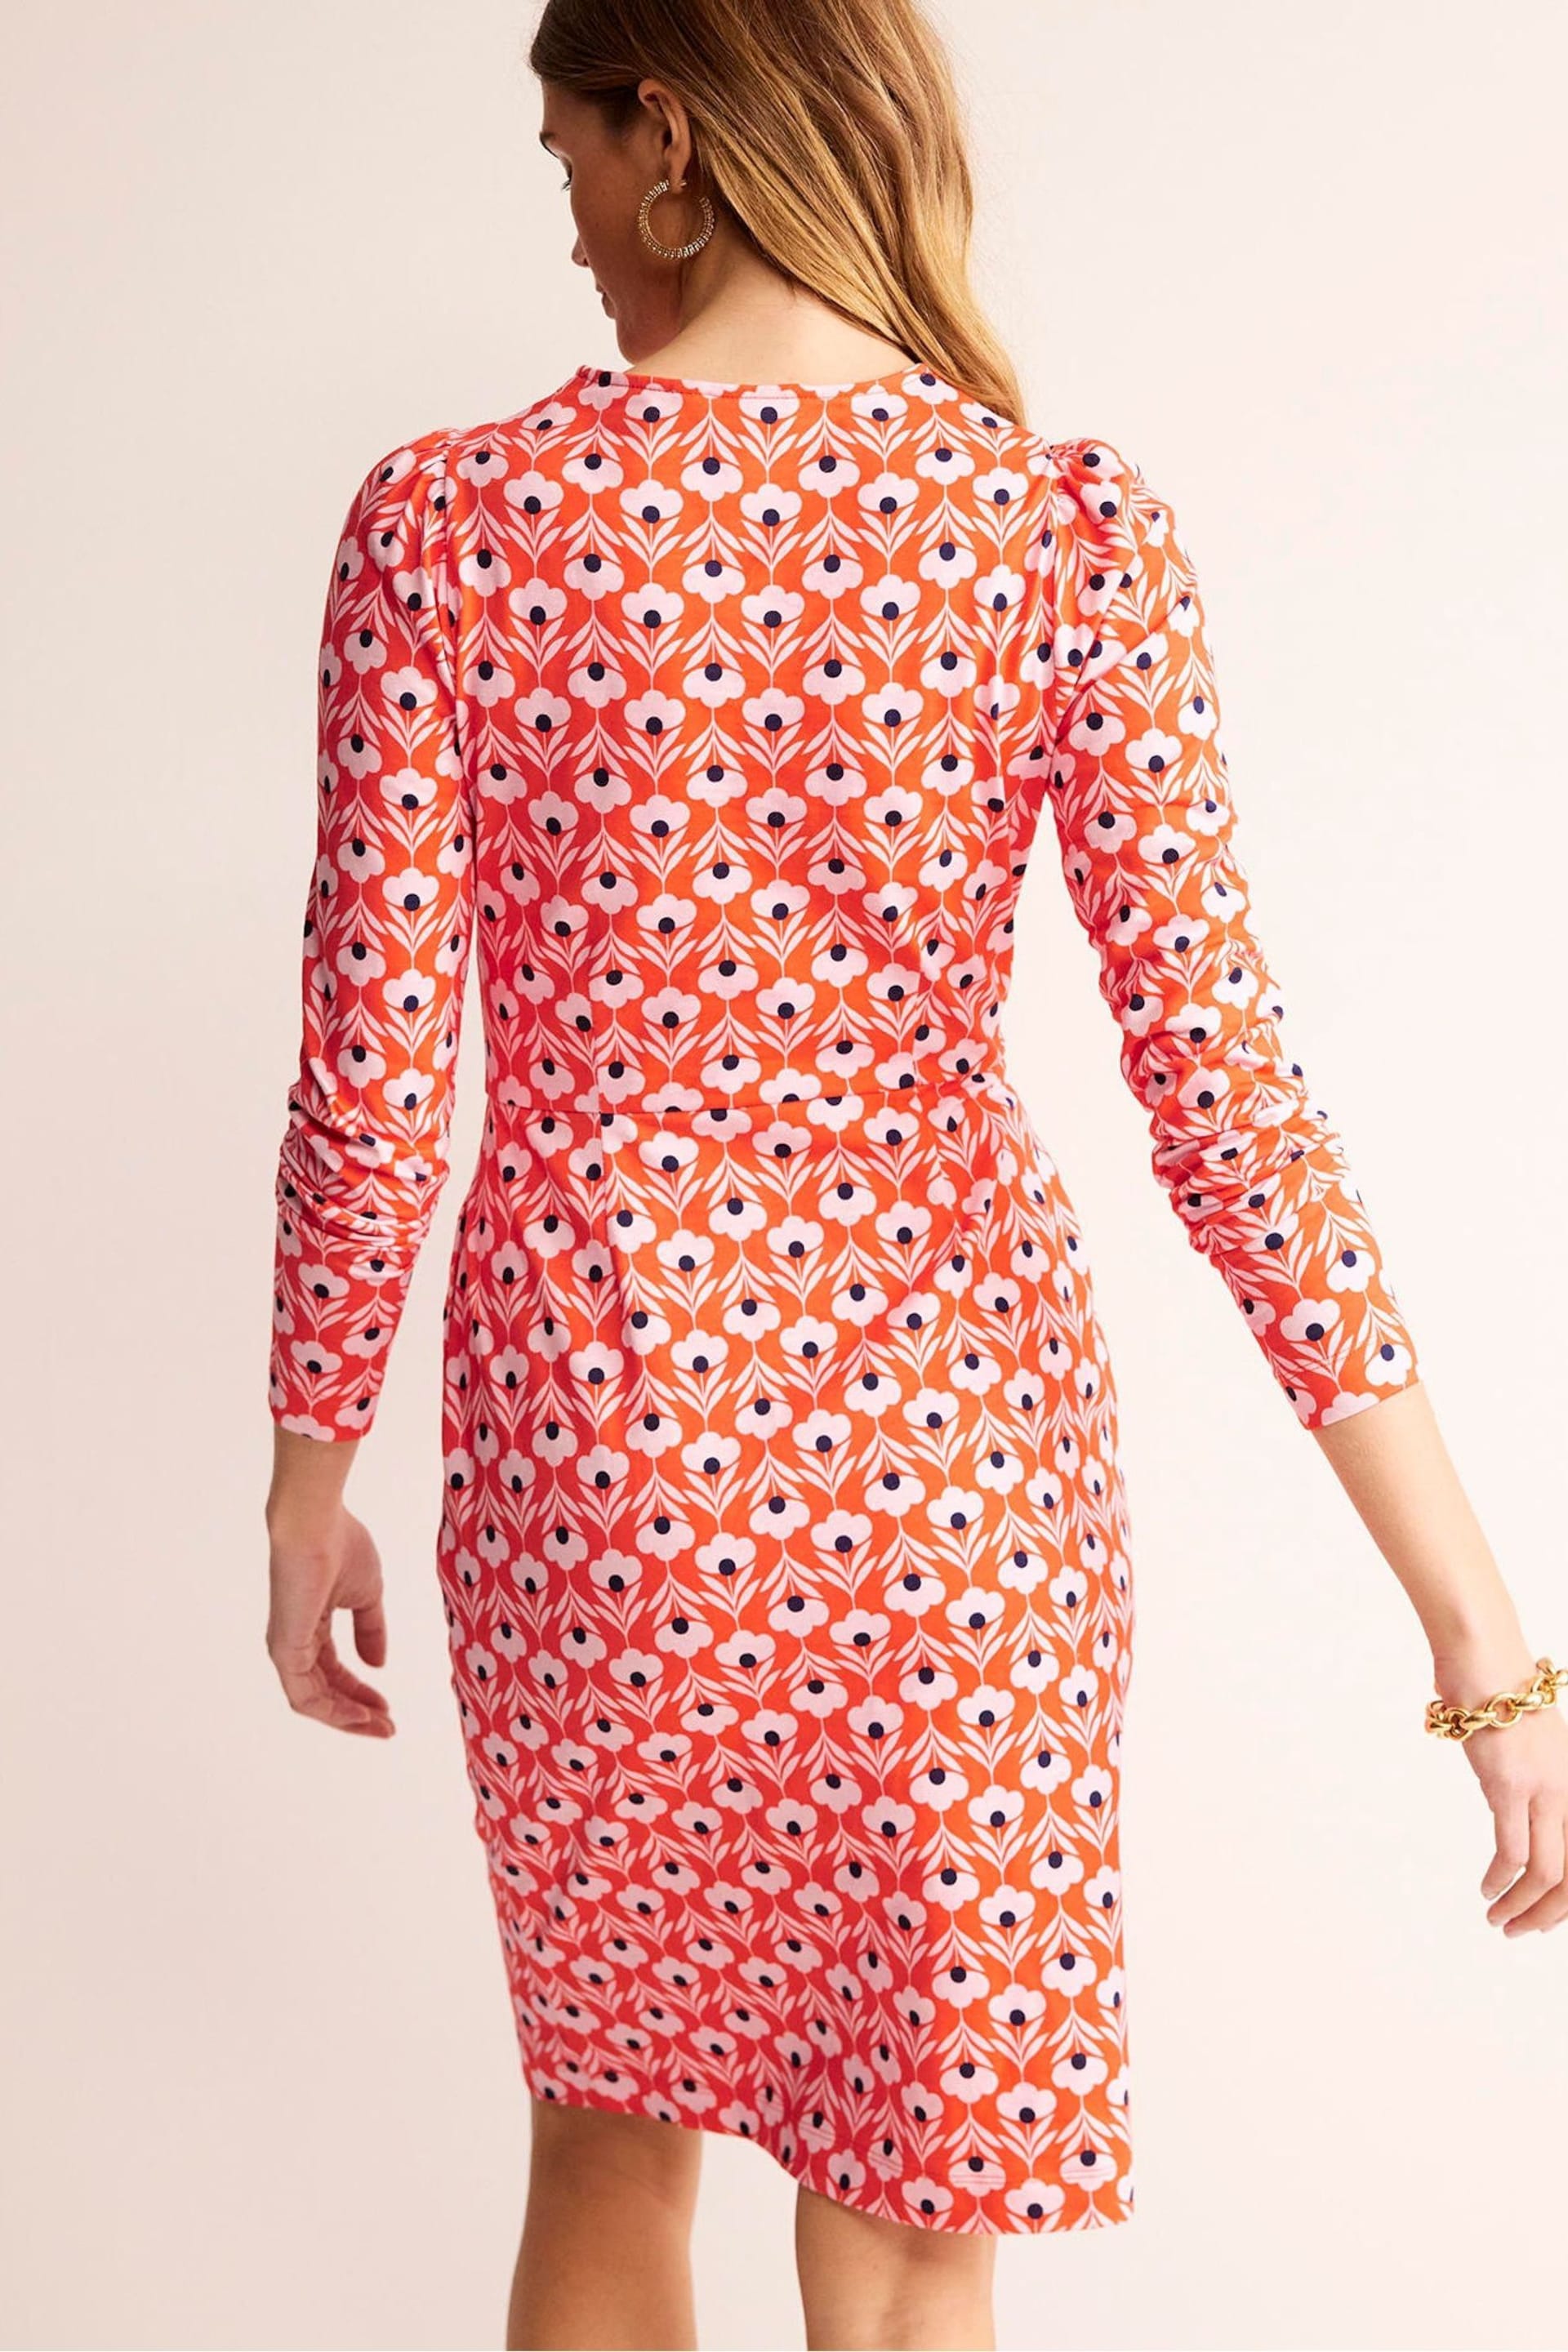 Boden Red Penelope Jersey Dress - Image 2 of 5